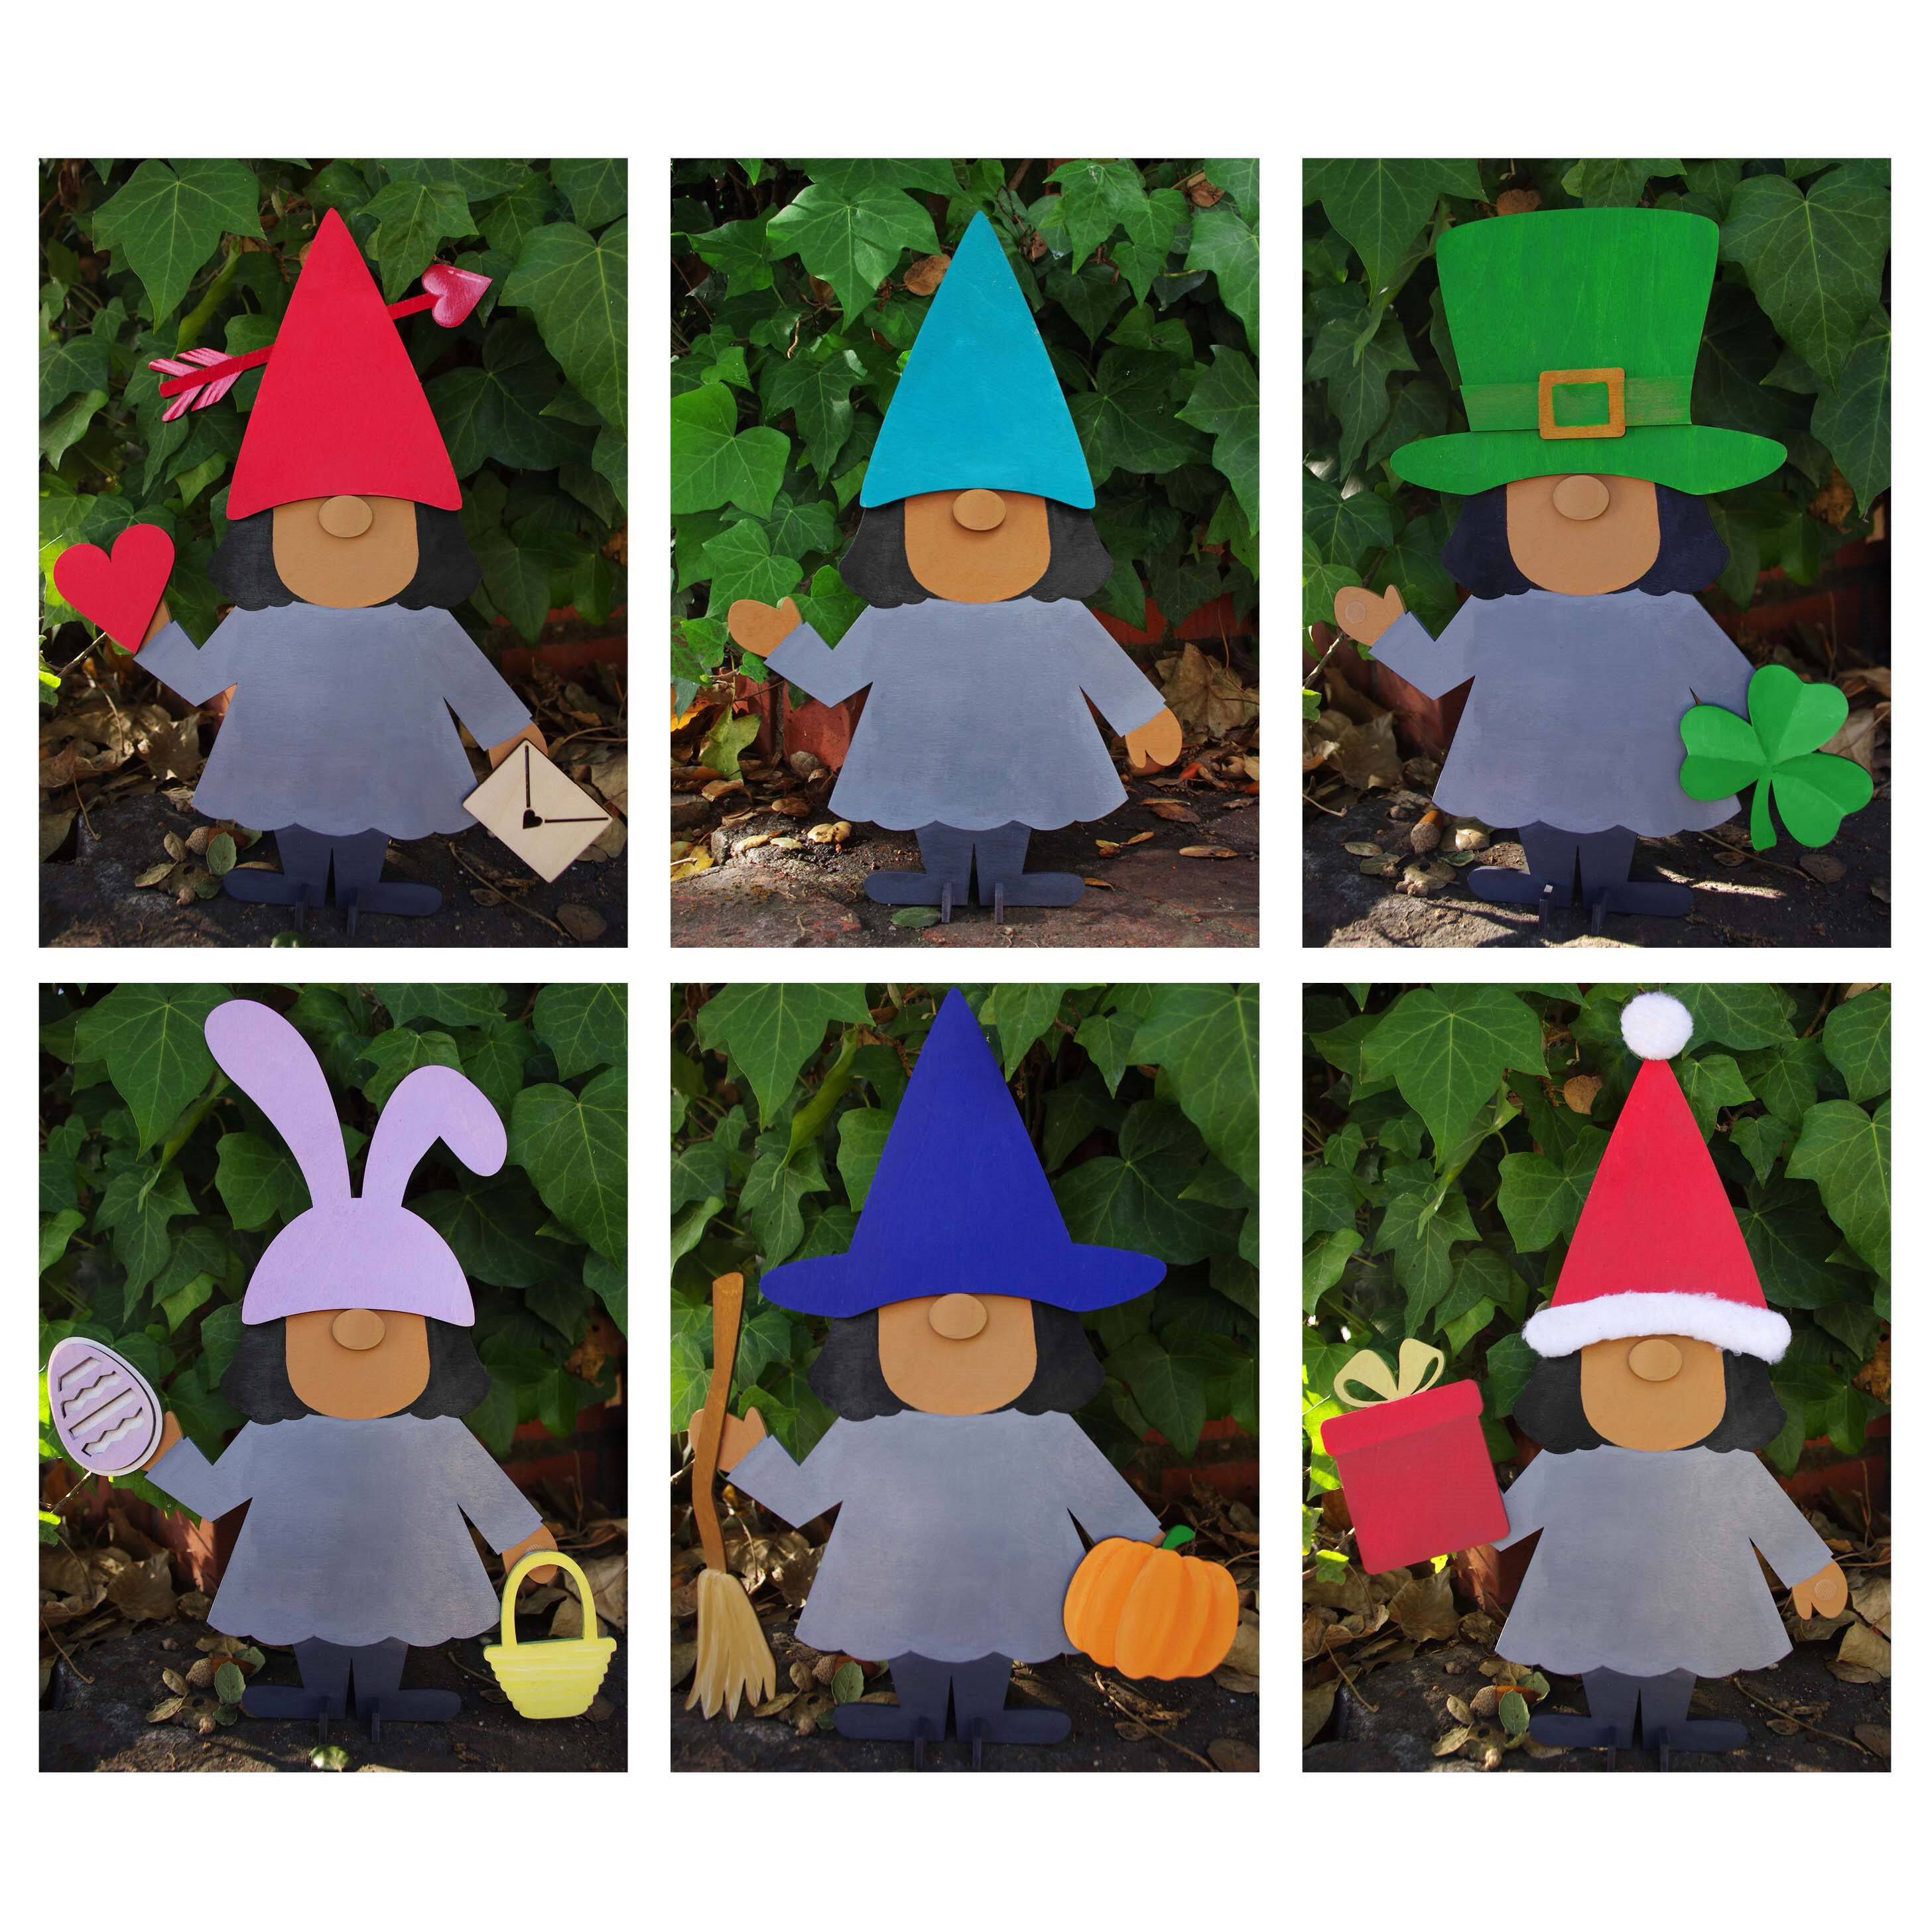 Leisure Arts&#xAE; Wooden Gnome Girl Holiday Kit